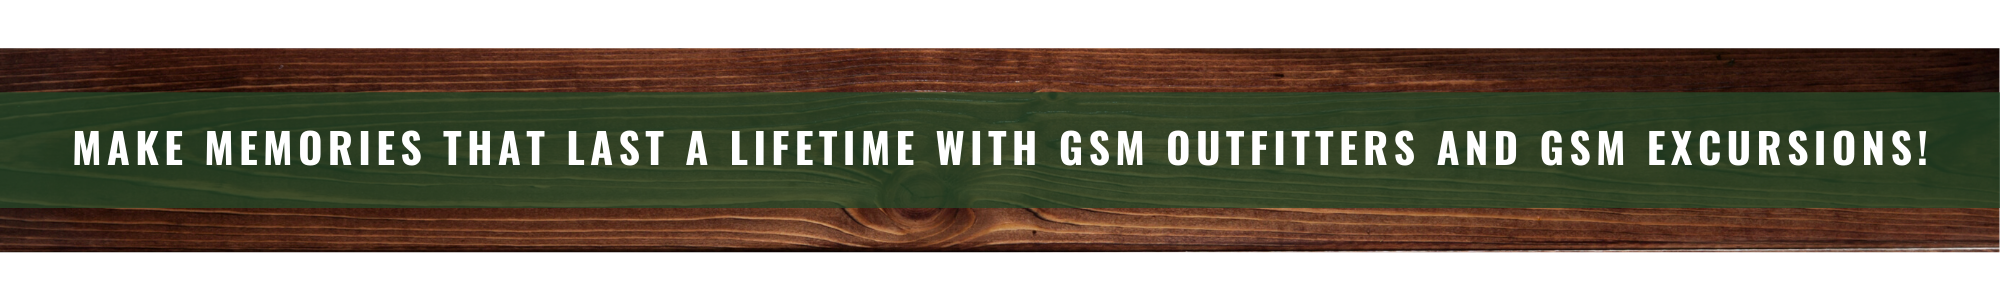 Make memories that last a lifetime with GSM Outfitters and GSM Excursions!